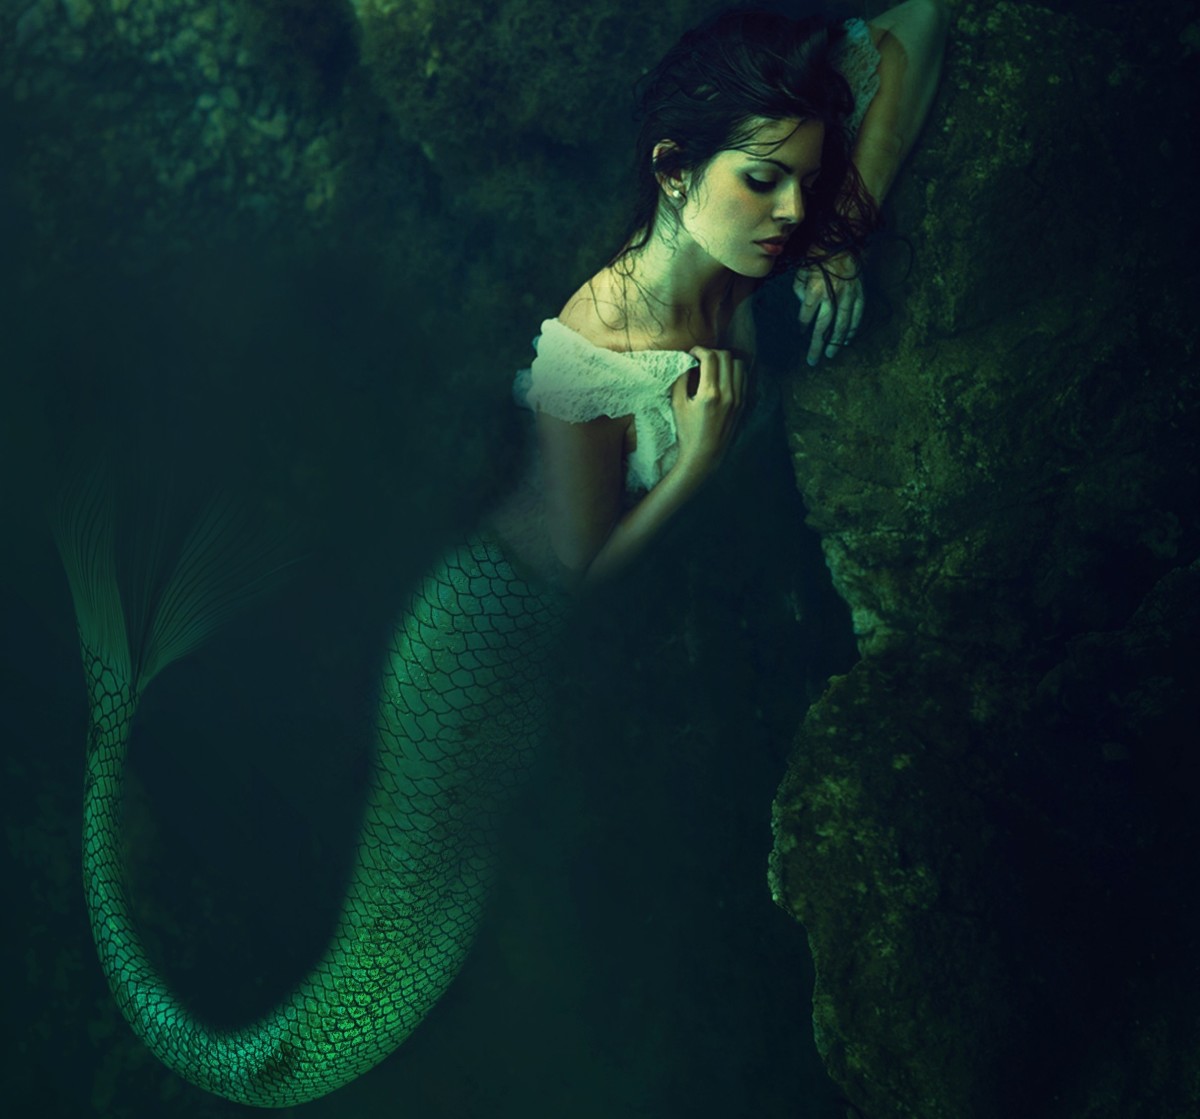 poems-about-mermaids